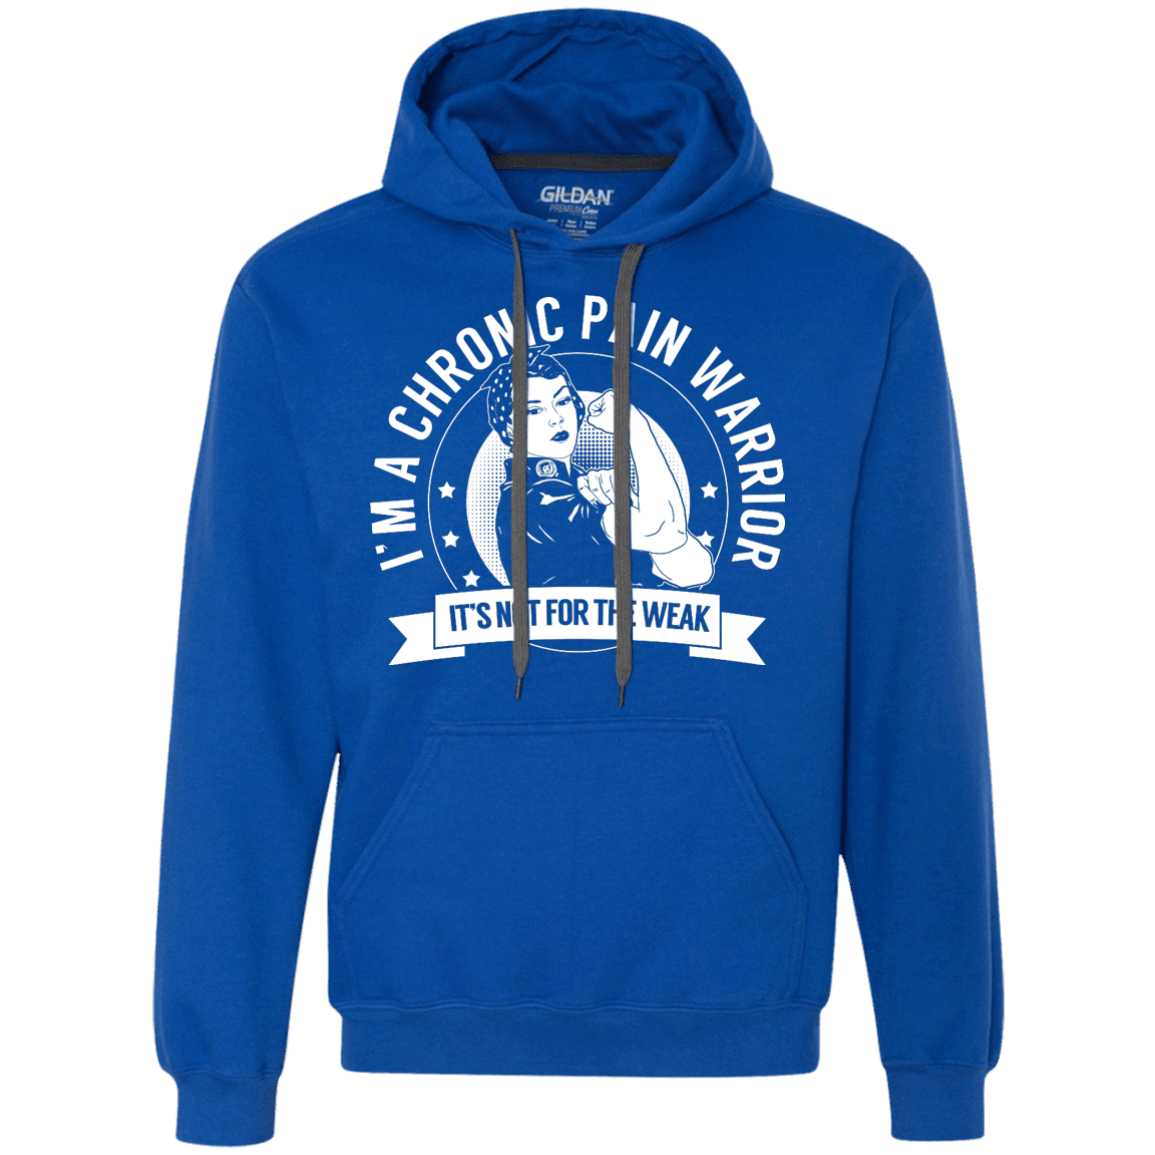 Chronic Pain Warrior Not For The Weak Pullover Hoodie - The Unchargeables